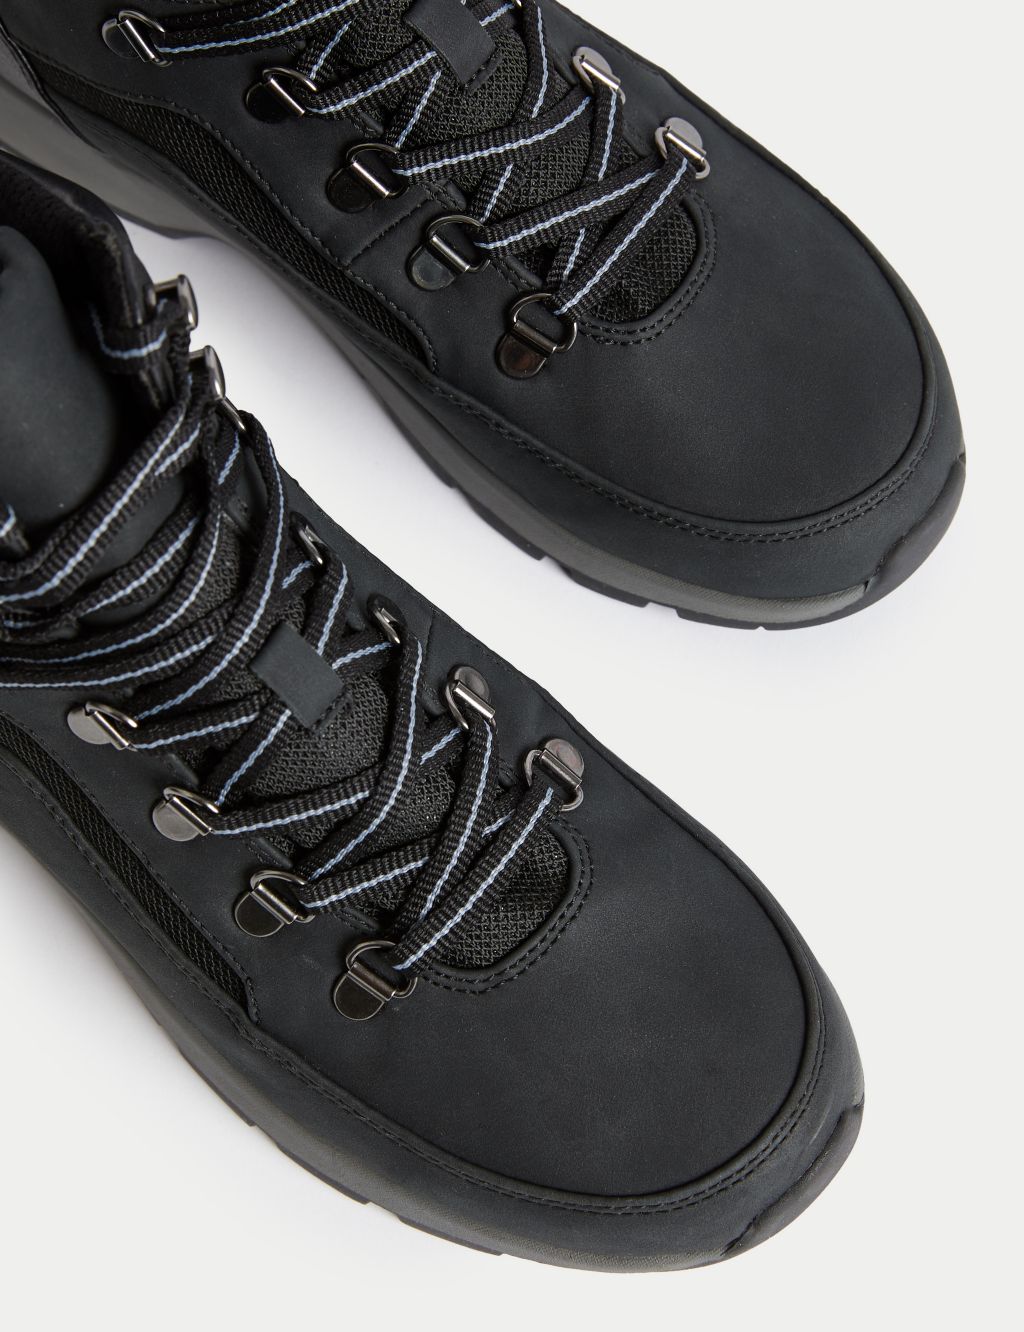 Waterproof Lace Up Walking Boots image 3